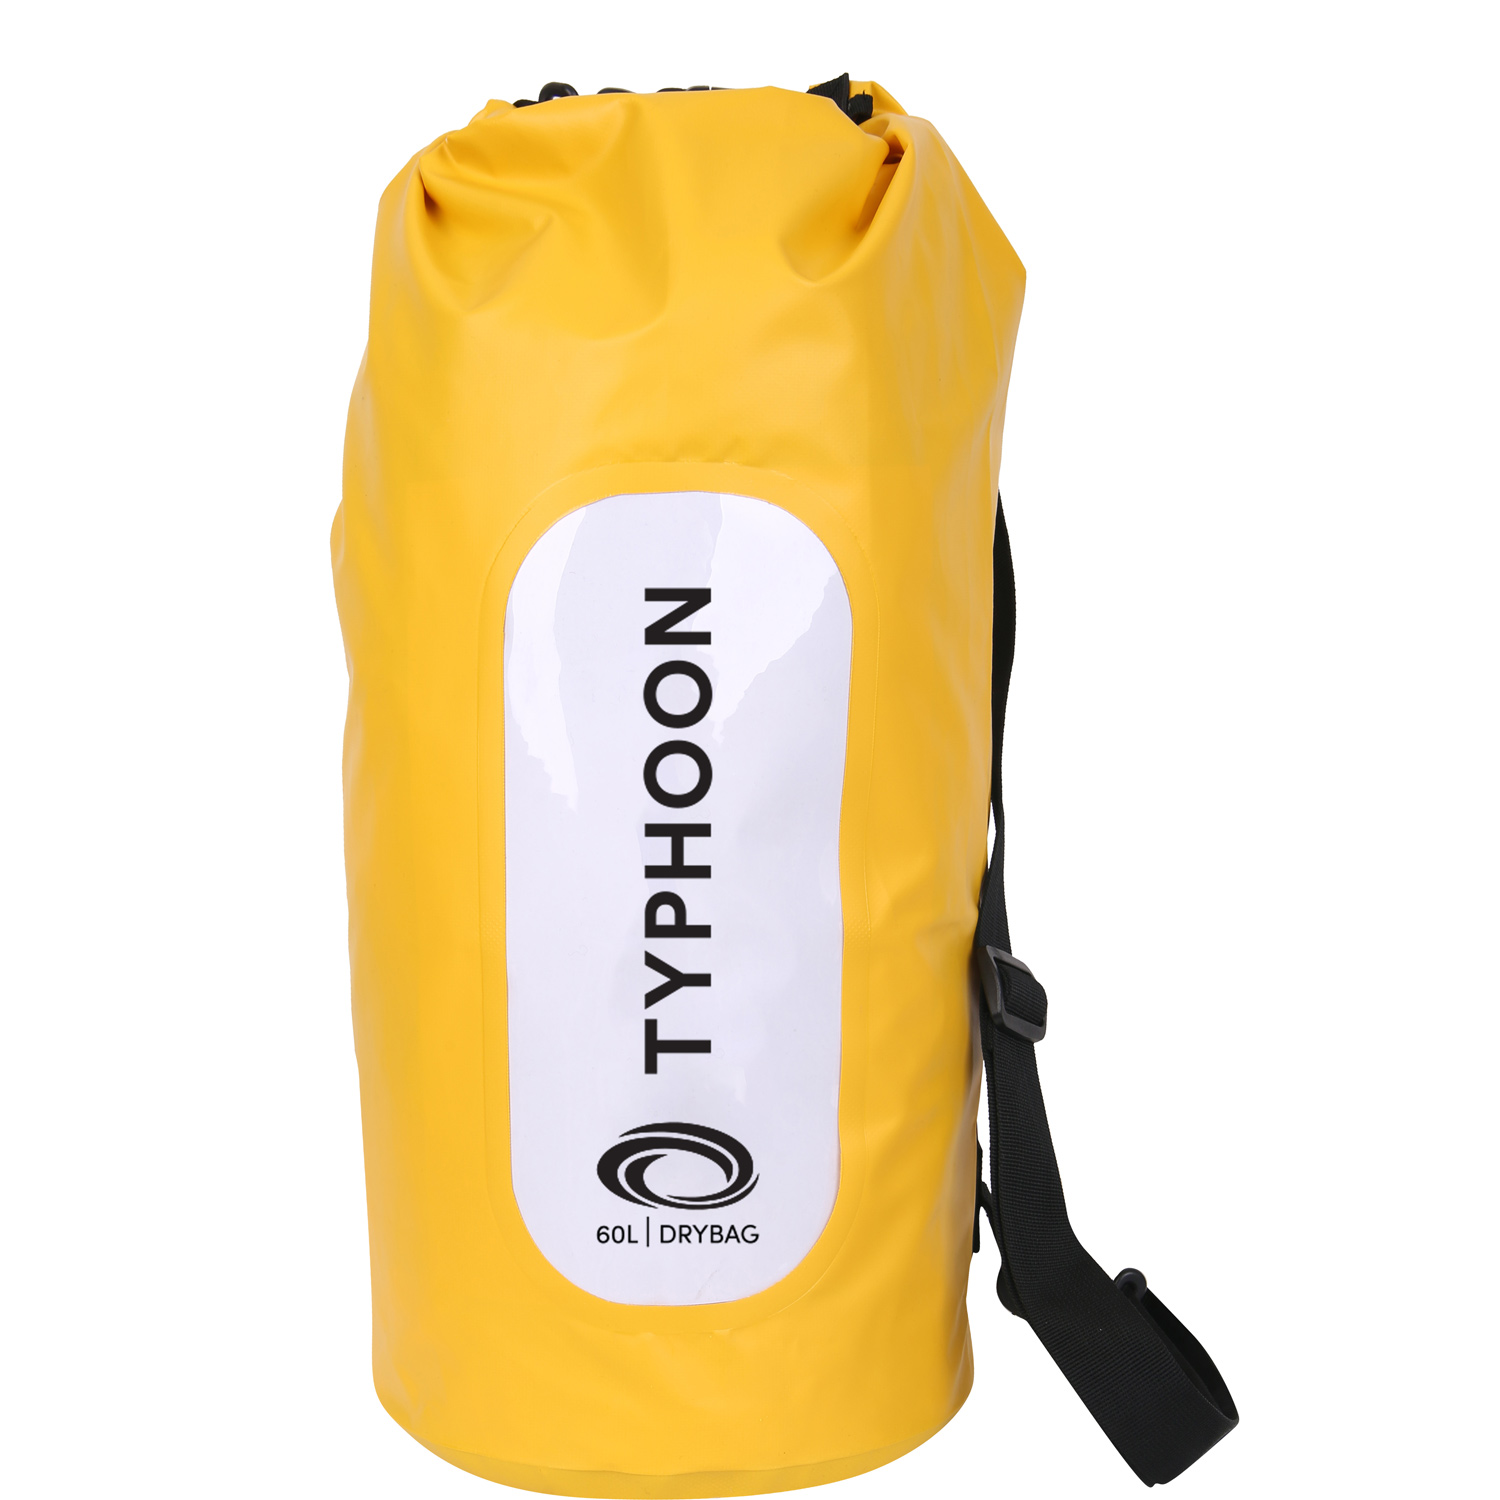 Two new sailing bags join the Typhoon International luggage range